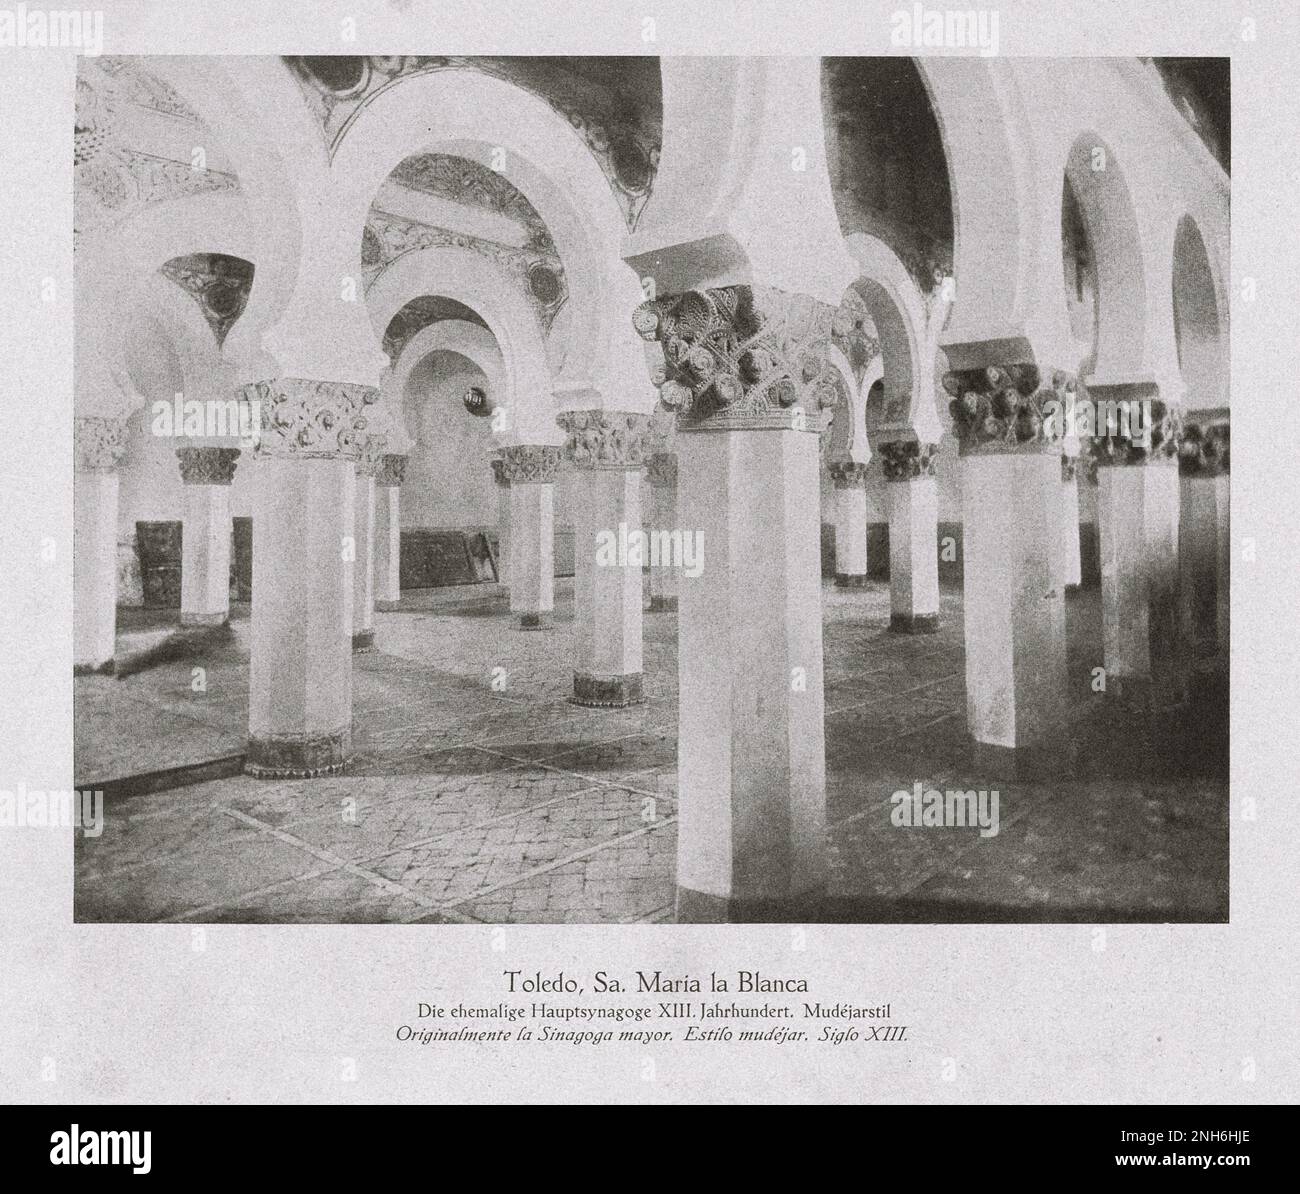 Architecture of Old Spain. Vintage photo of Synagogue of Santa María la Blanca, Toledo. The former main synagogue of the XIII century. Mudejar style The Synagogue of Santa María la Blanca (Spanish: Sinagoga de Santa María La Blanca, lit. 'Synagogue of Saint Mary the White') or Ibn Shoshan Synaogue is a museum and former synagogue in Toledo, Spain. Stock Photo